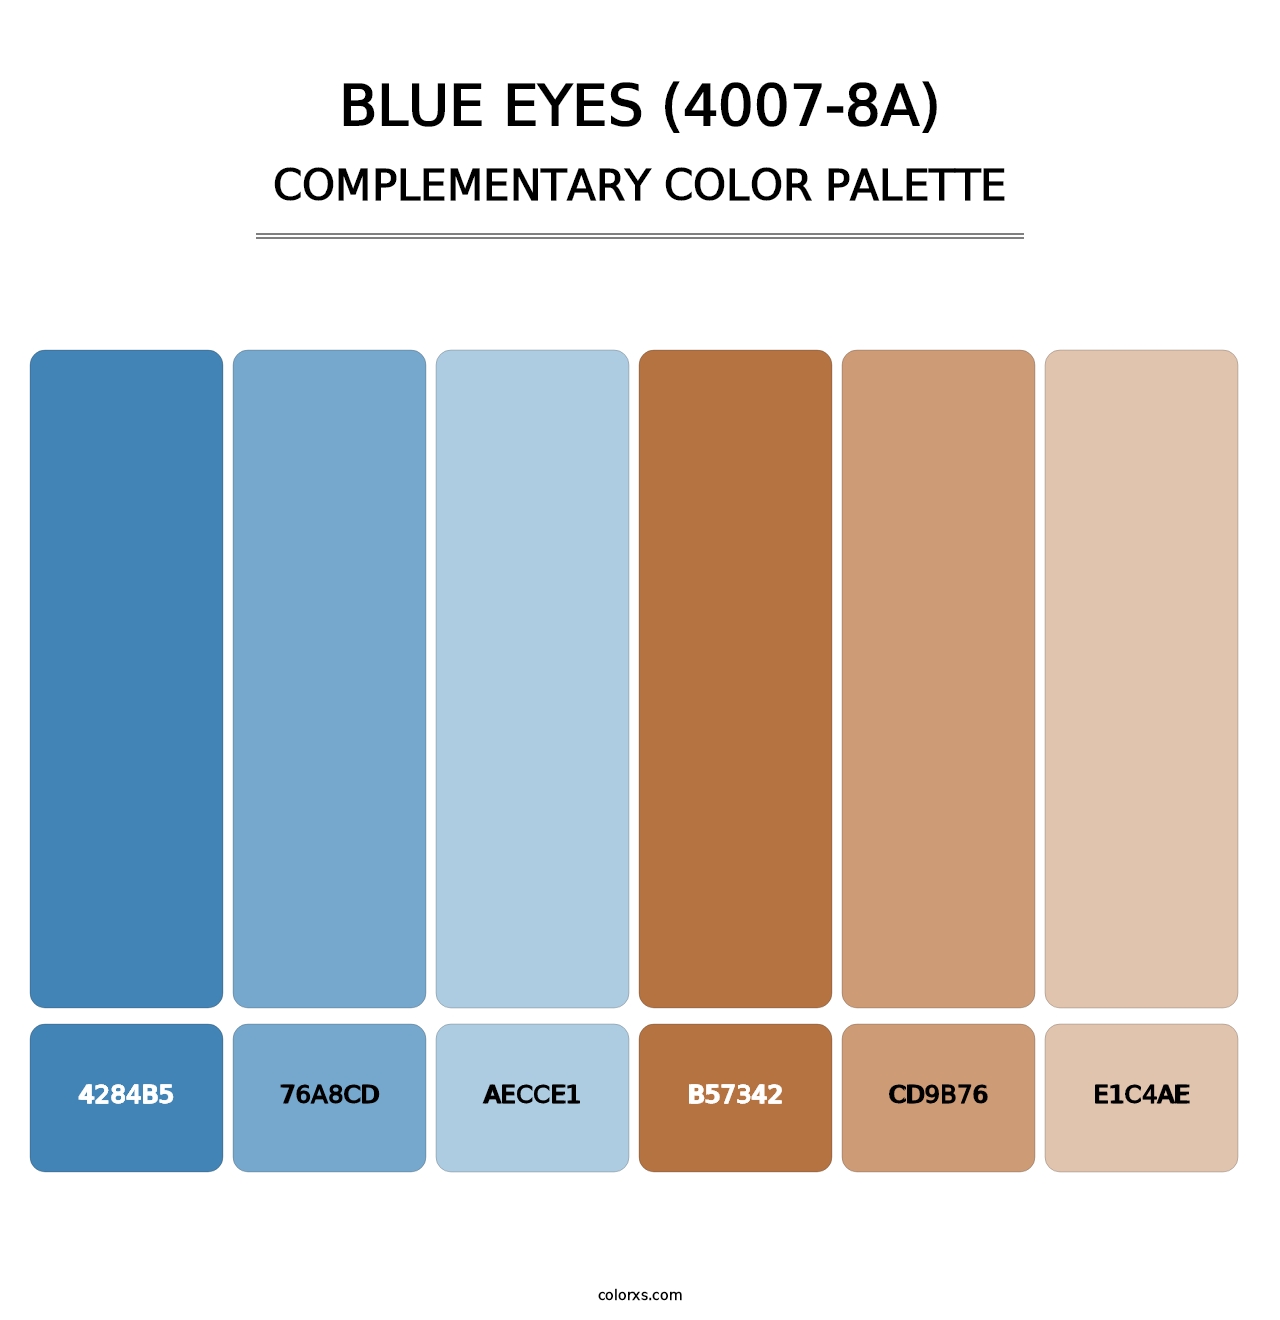 Blue Eyes (4007-8A) - Complementary Color Palette